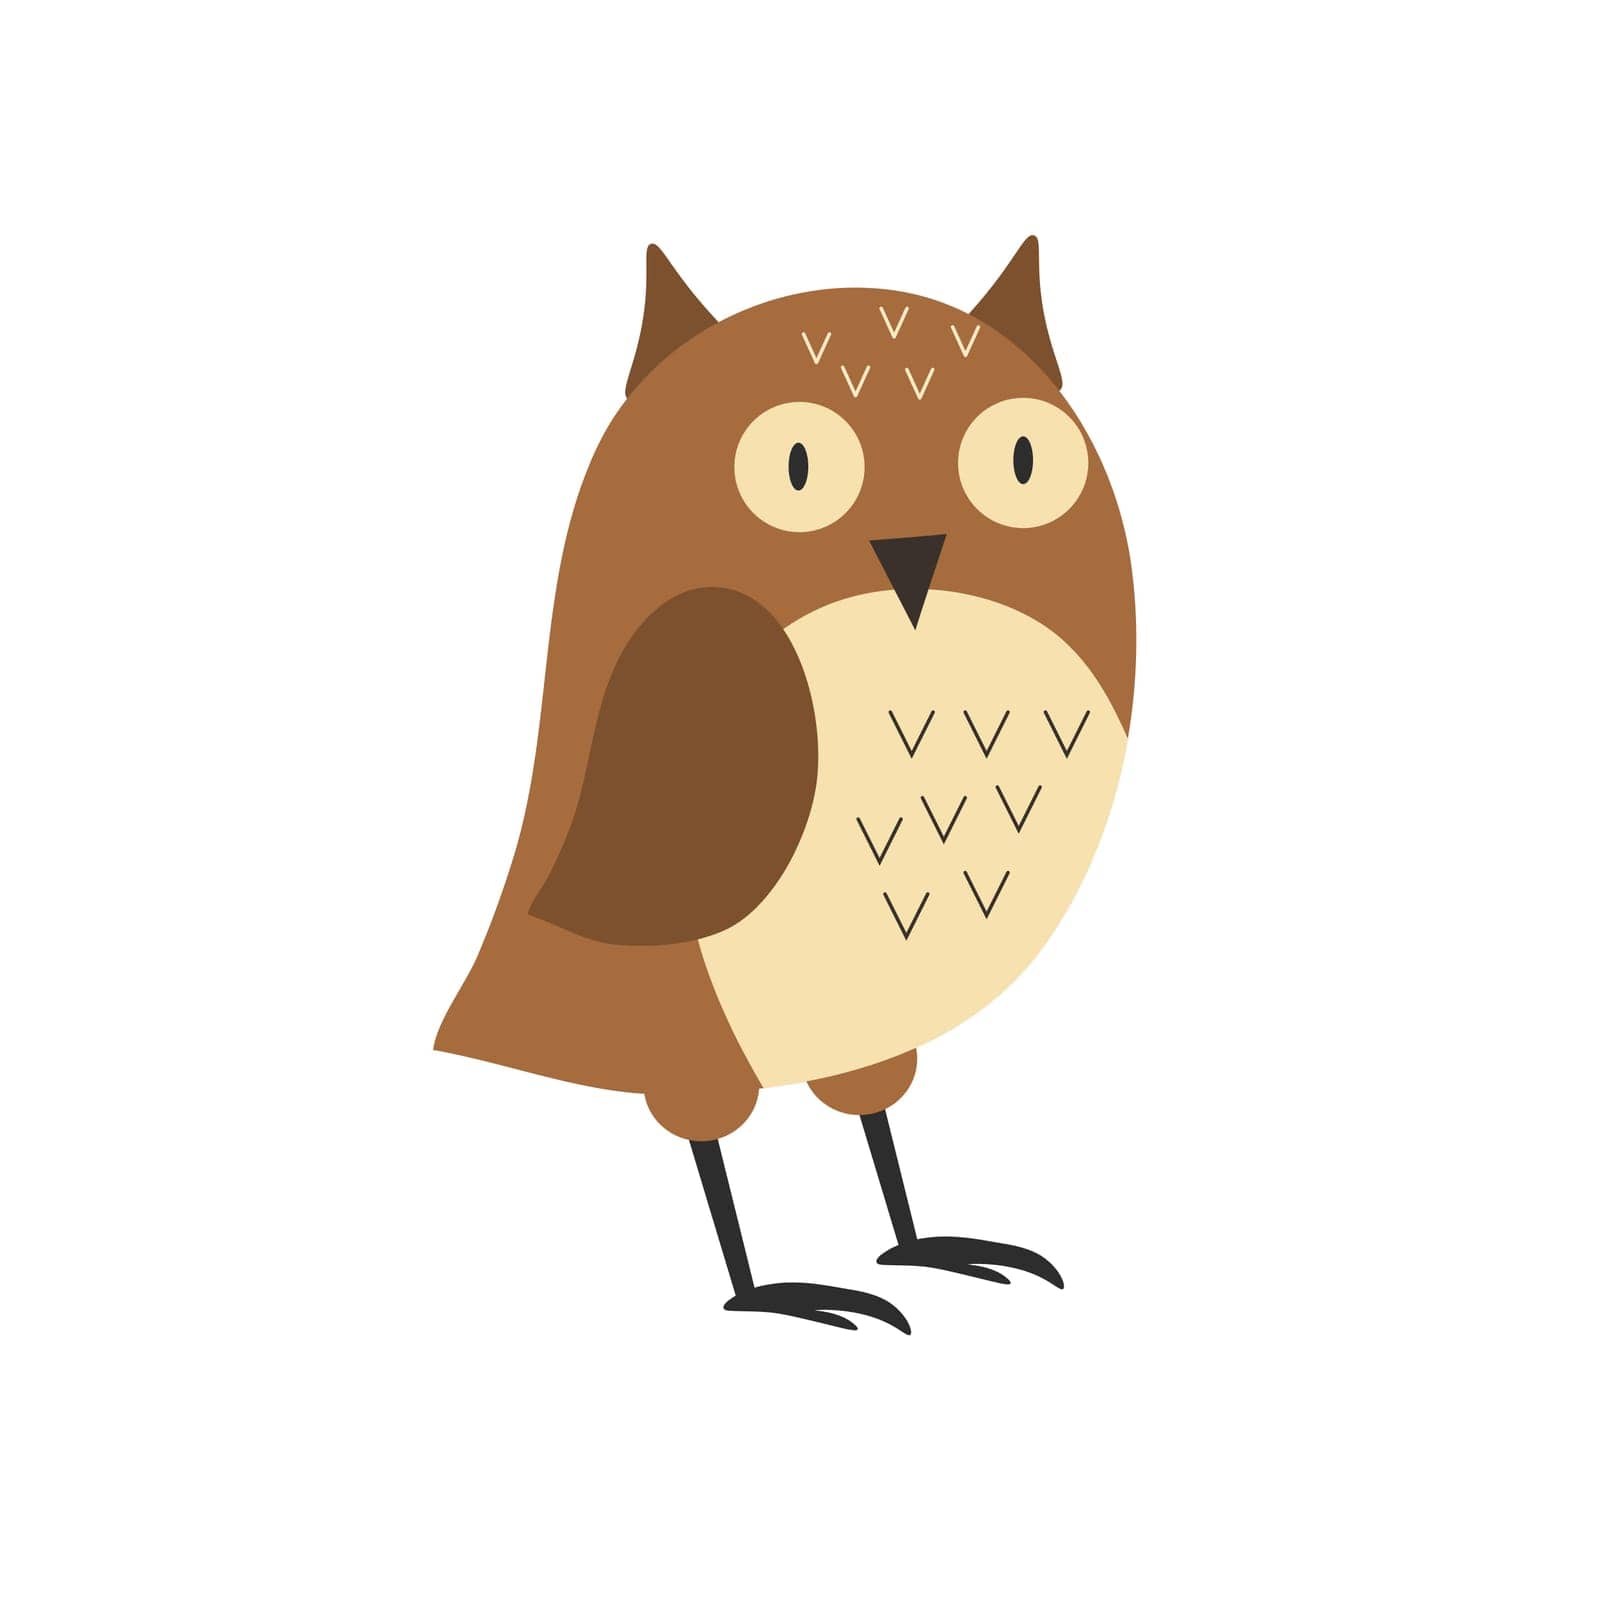 Cute brown owl with big eyes isolated on white background. Cartoon character. Flat vector illustration for children s books illustrating, printing materials. EPS by Alxyzt